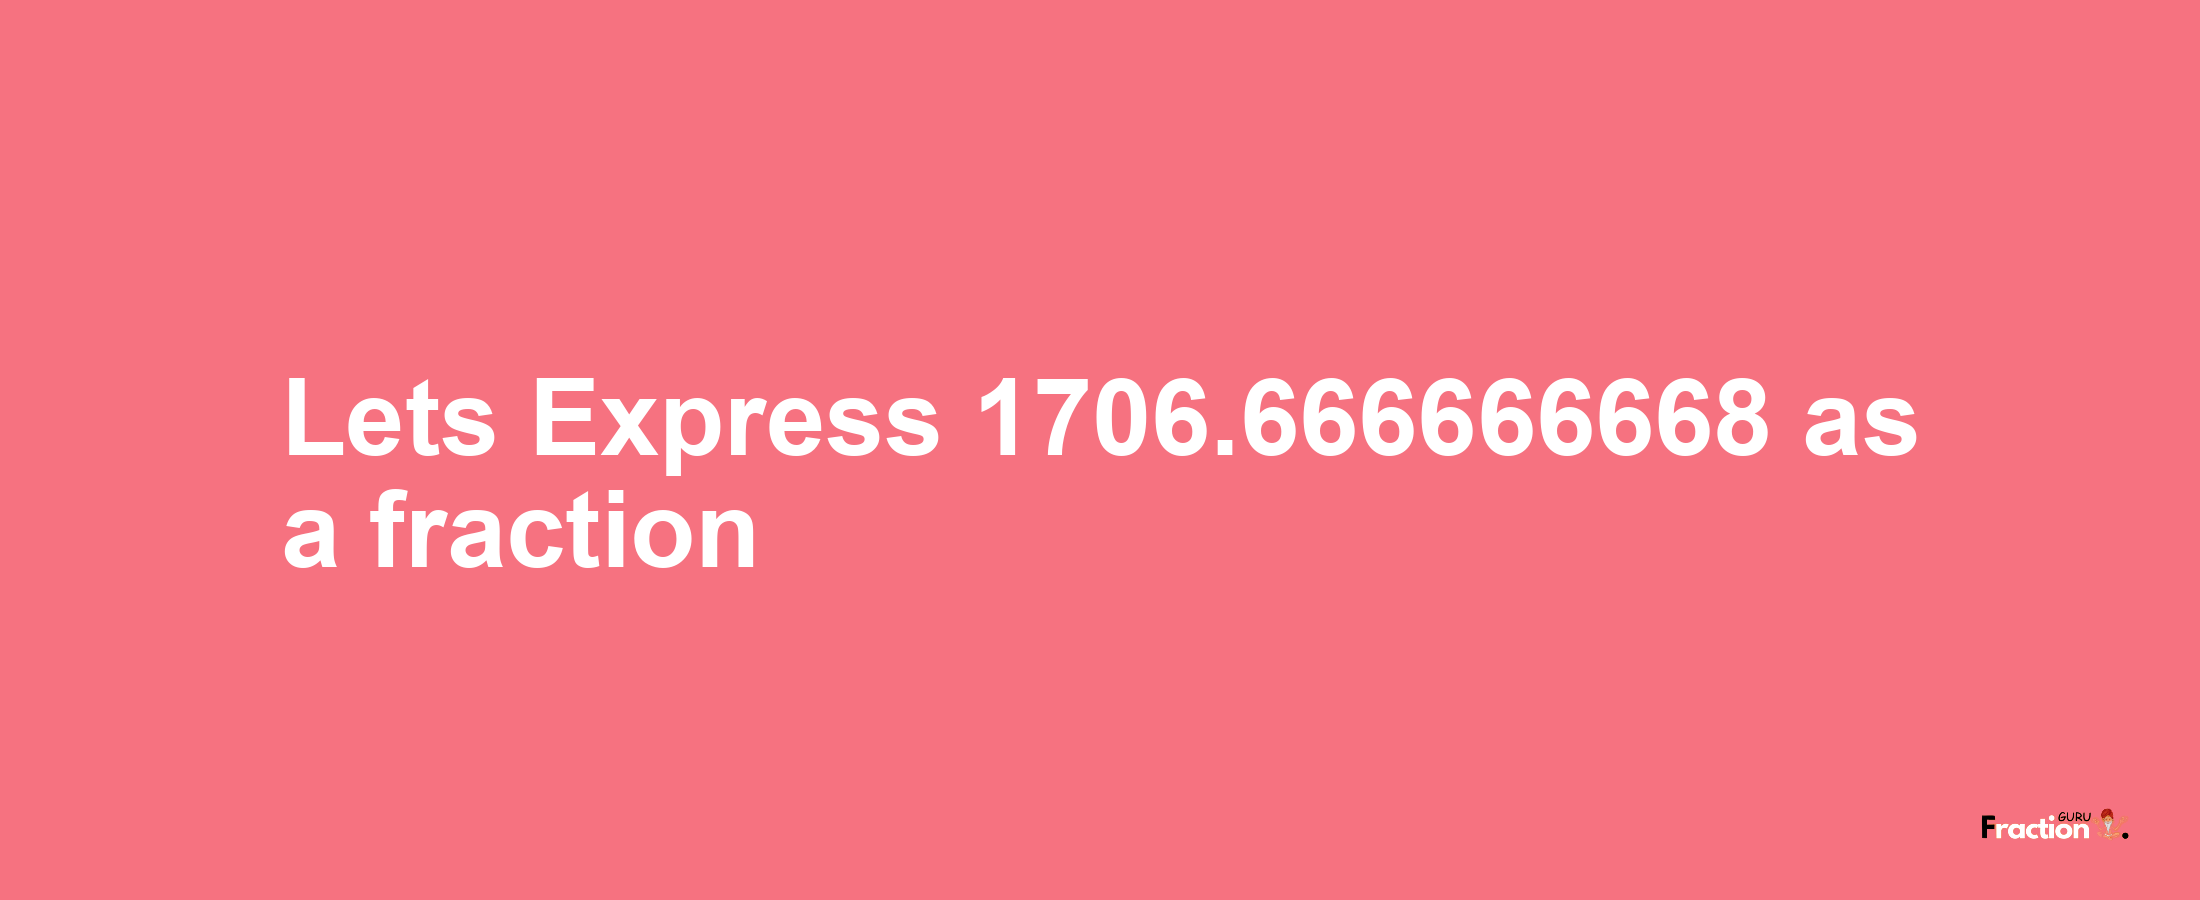 Lets Express 1706.666666668 as afraction